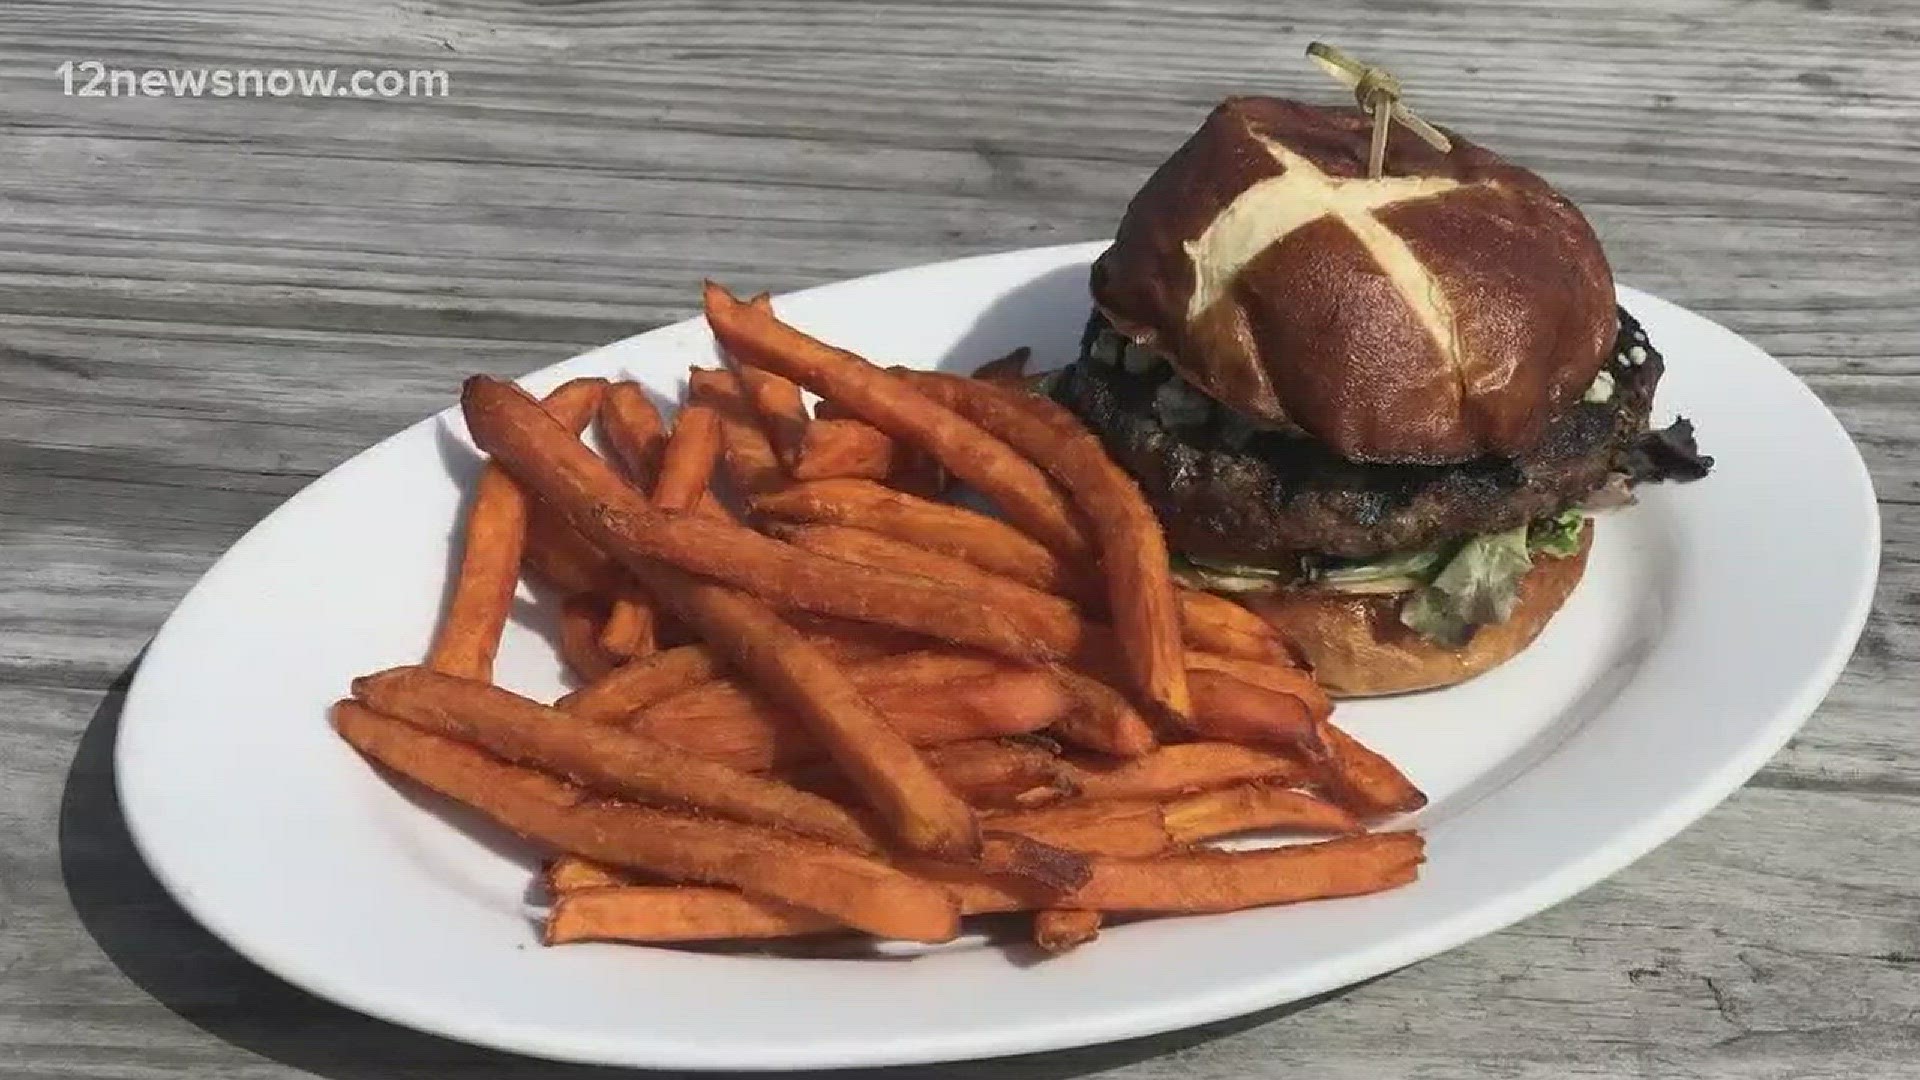 There's always room for a good burger, like the delicious Bison Burger you'll find at the Neches River Wheelhouse!